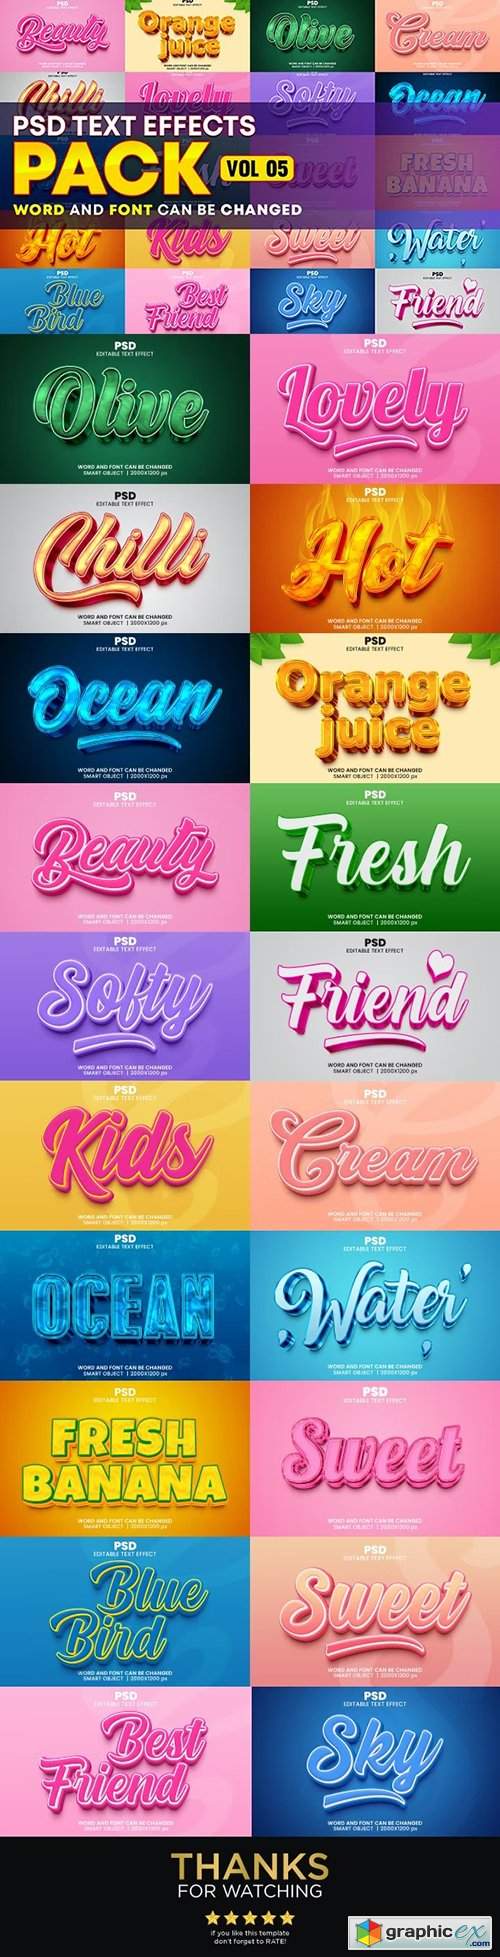 Photoshop Editable 3d Text Effect Style Pack 